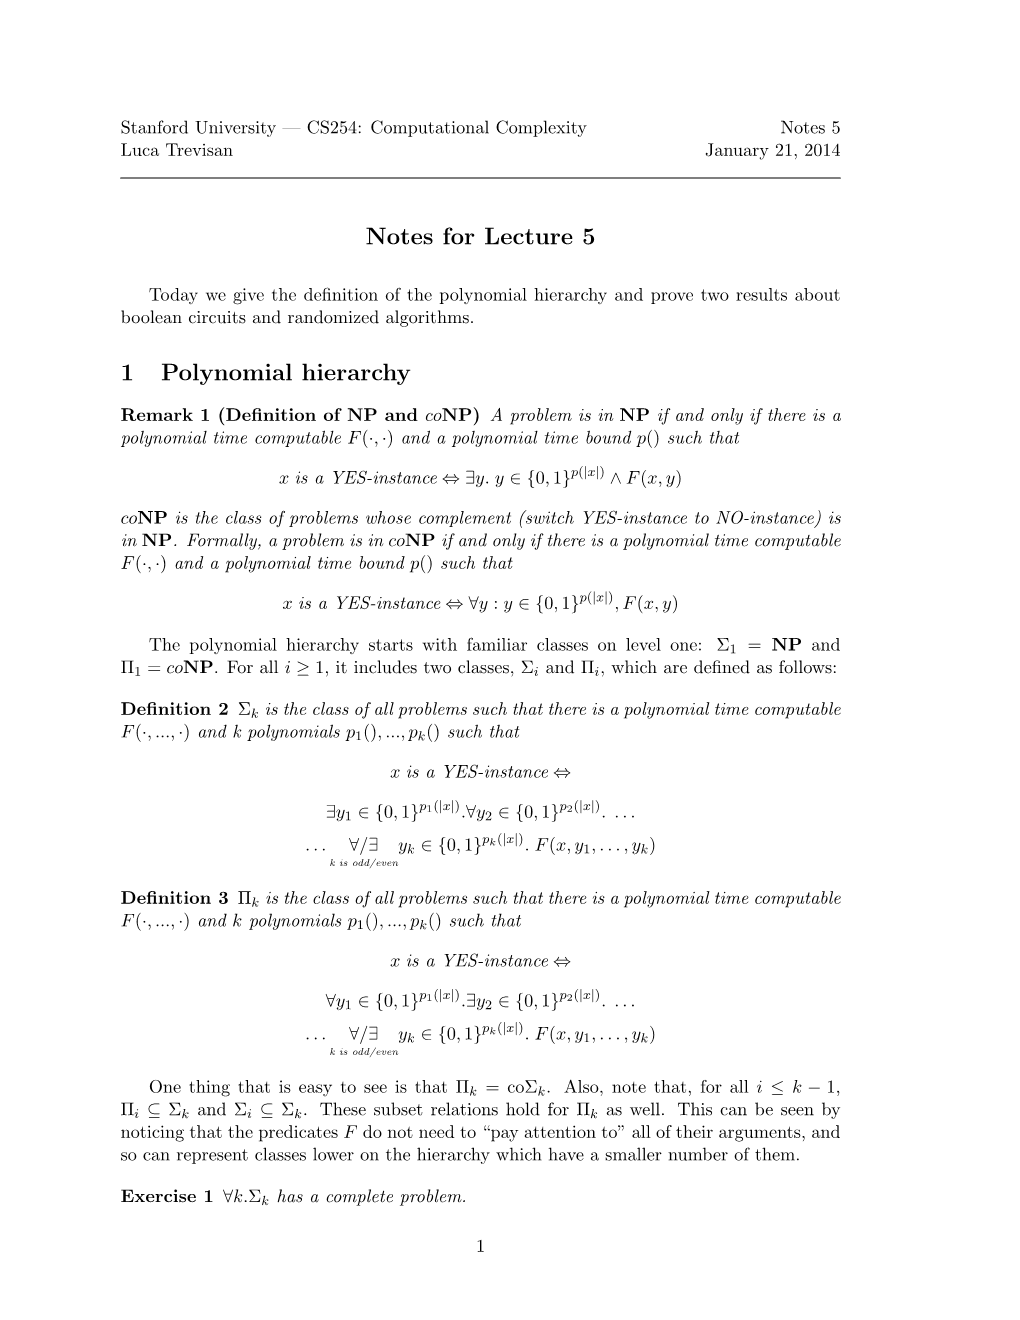 Notes for Lecture 5 1 Polynomial Hierarchy